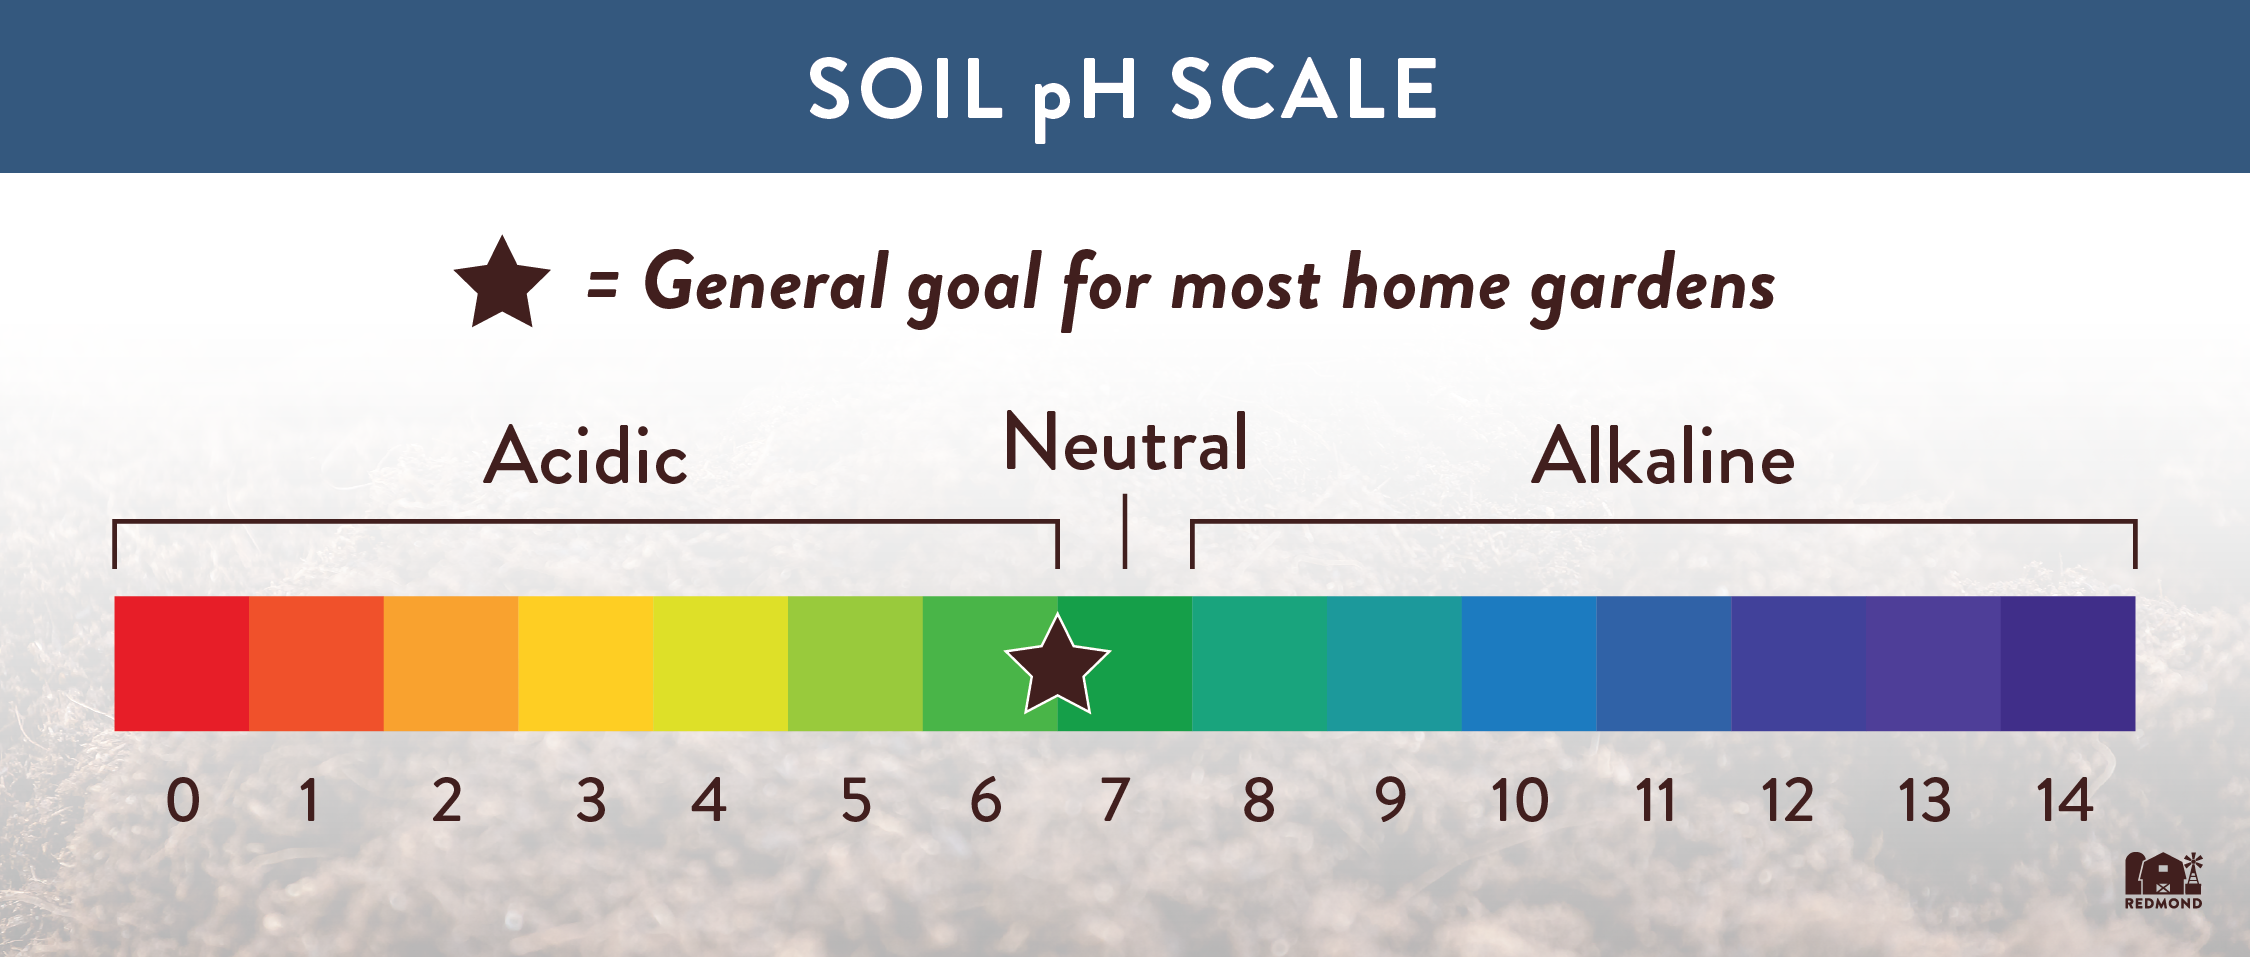 What should my soil pH be